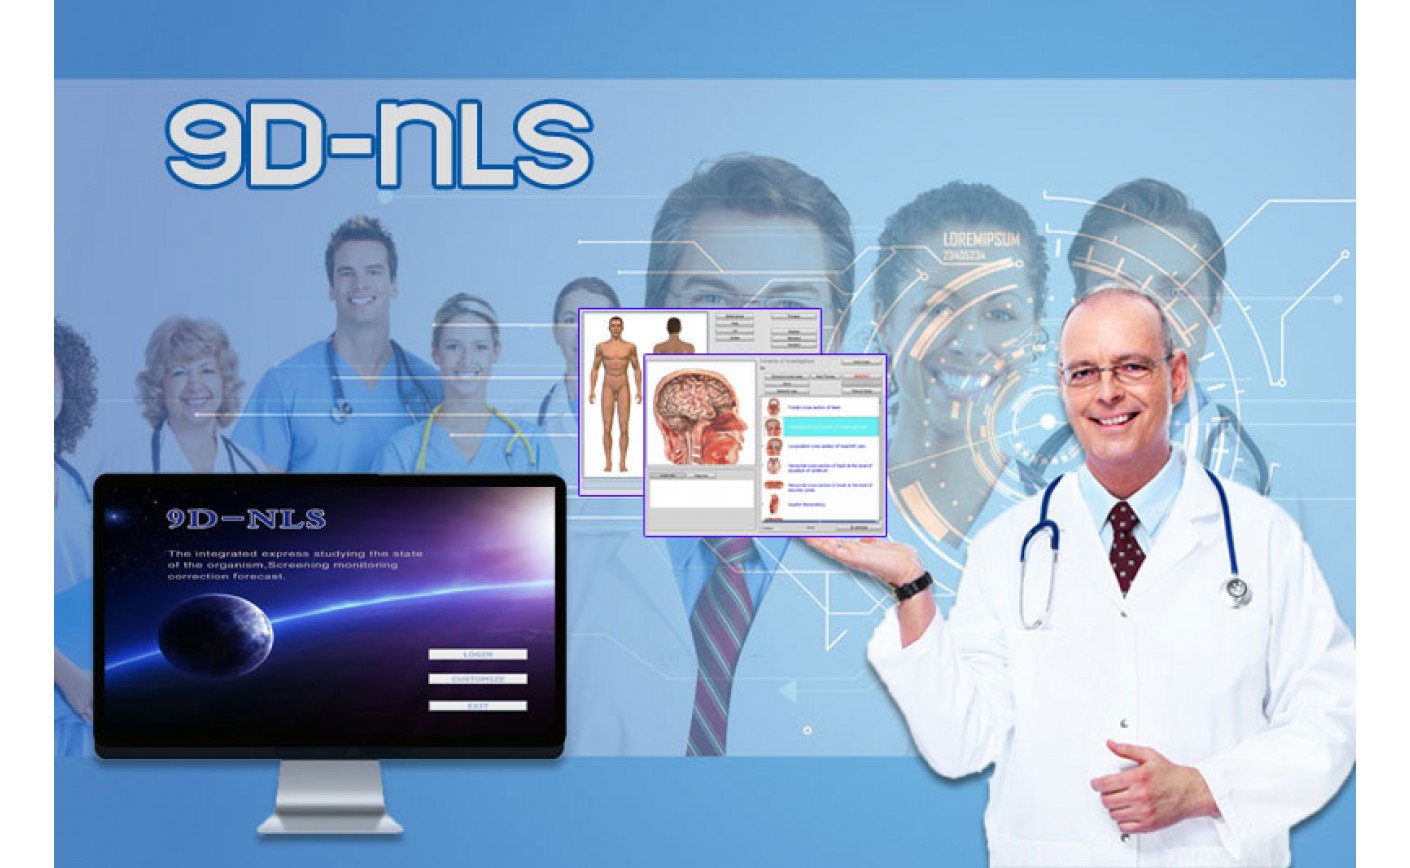 Three Main Functions For 9D-NLS Health analyzer